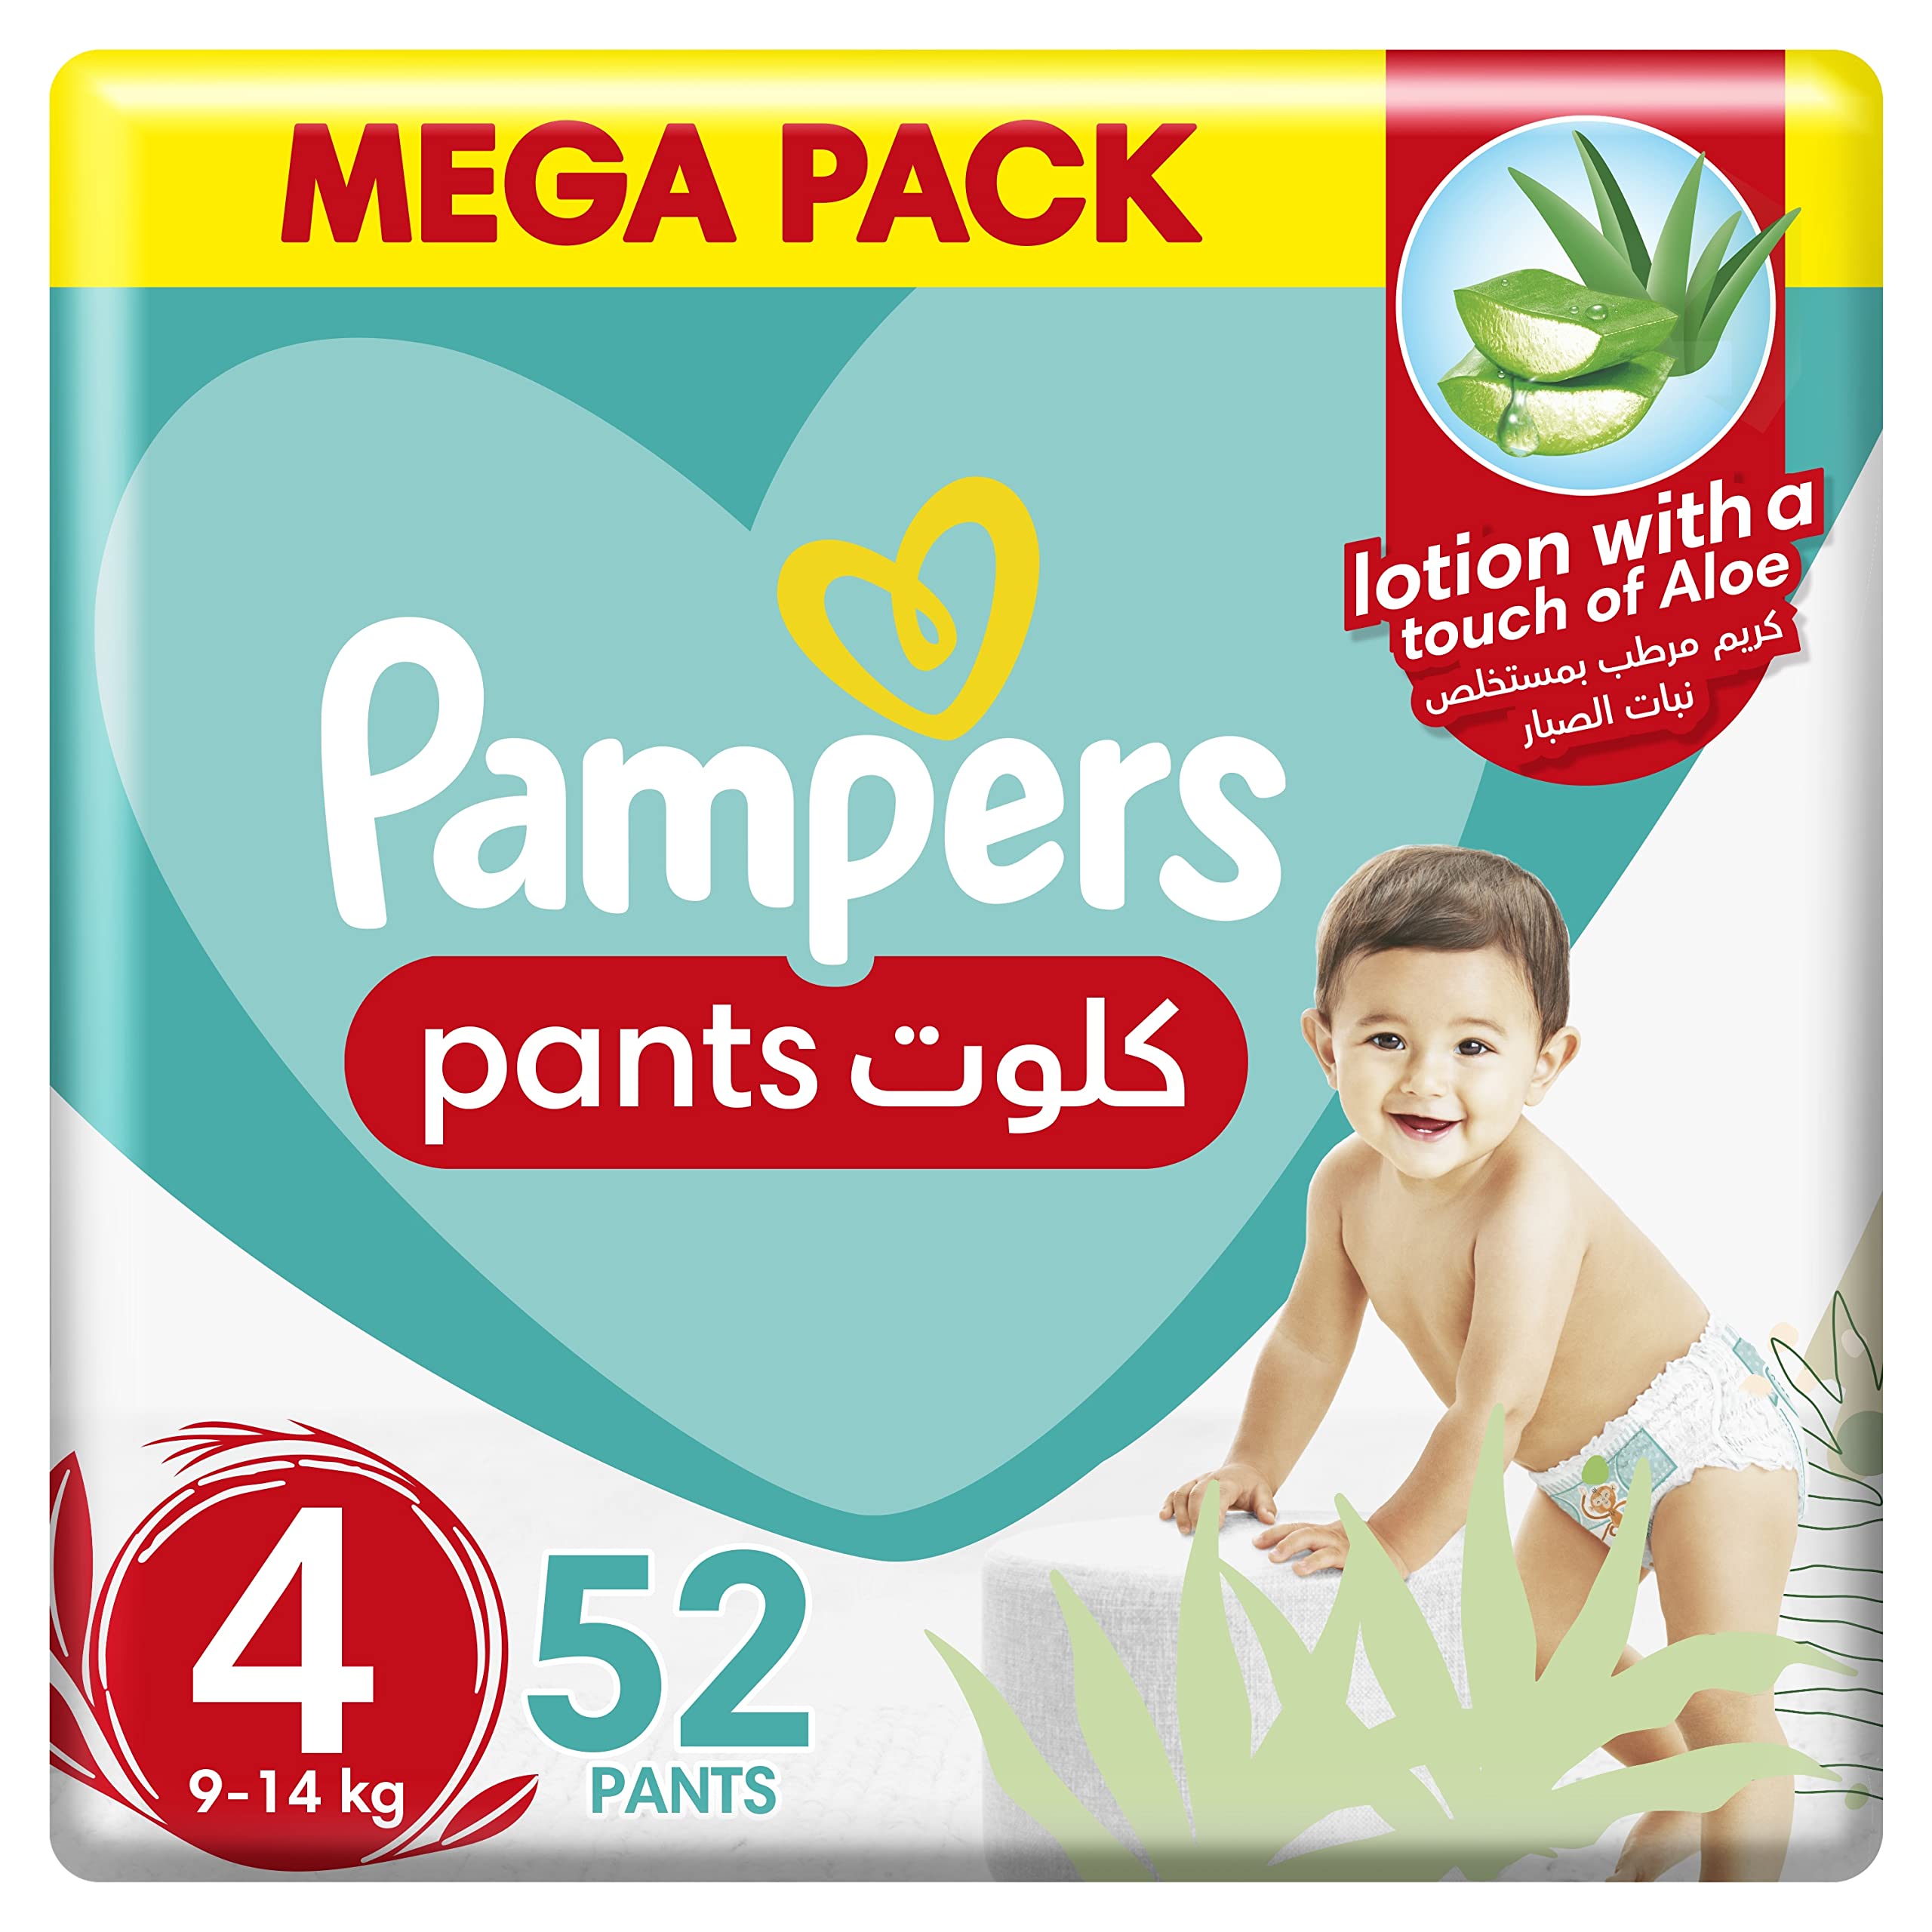 Pampers Baby-Dry Pants Diapers Size 4, 9-14kg With Stretchy Sides for Better Fit 52pcs حفاضات بامبرز مصممة على شكل سروال داخلي، مقاس 4، عبوة ضخمة، 9-14 كغم، 52 قطعة